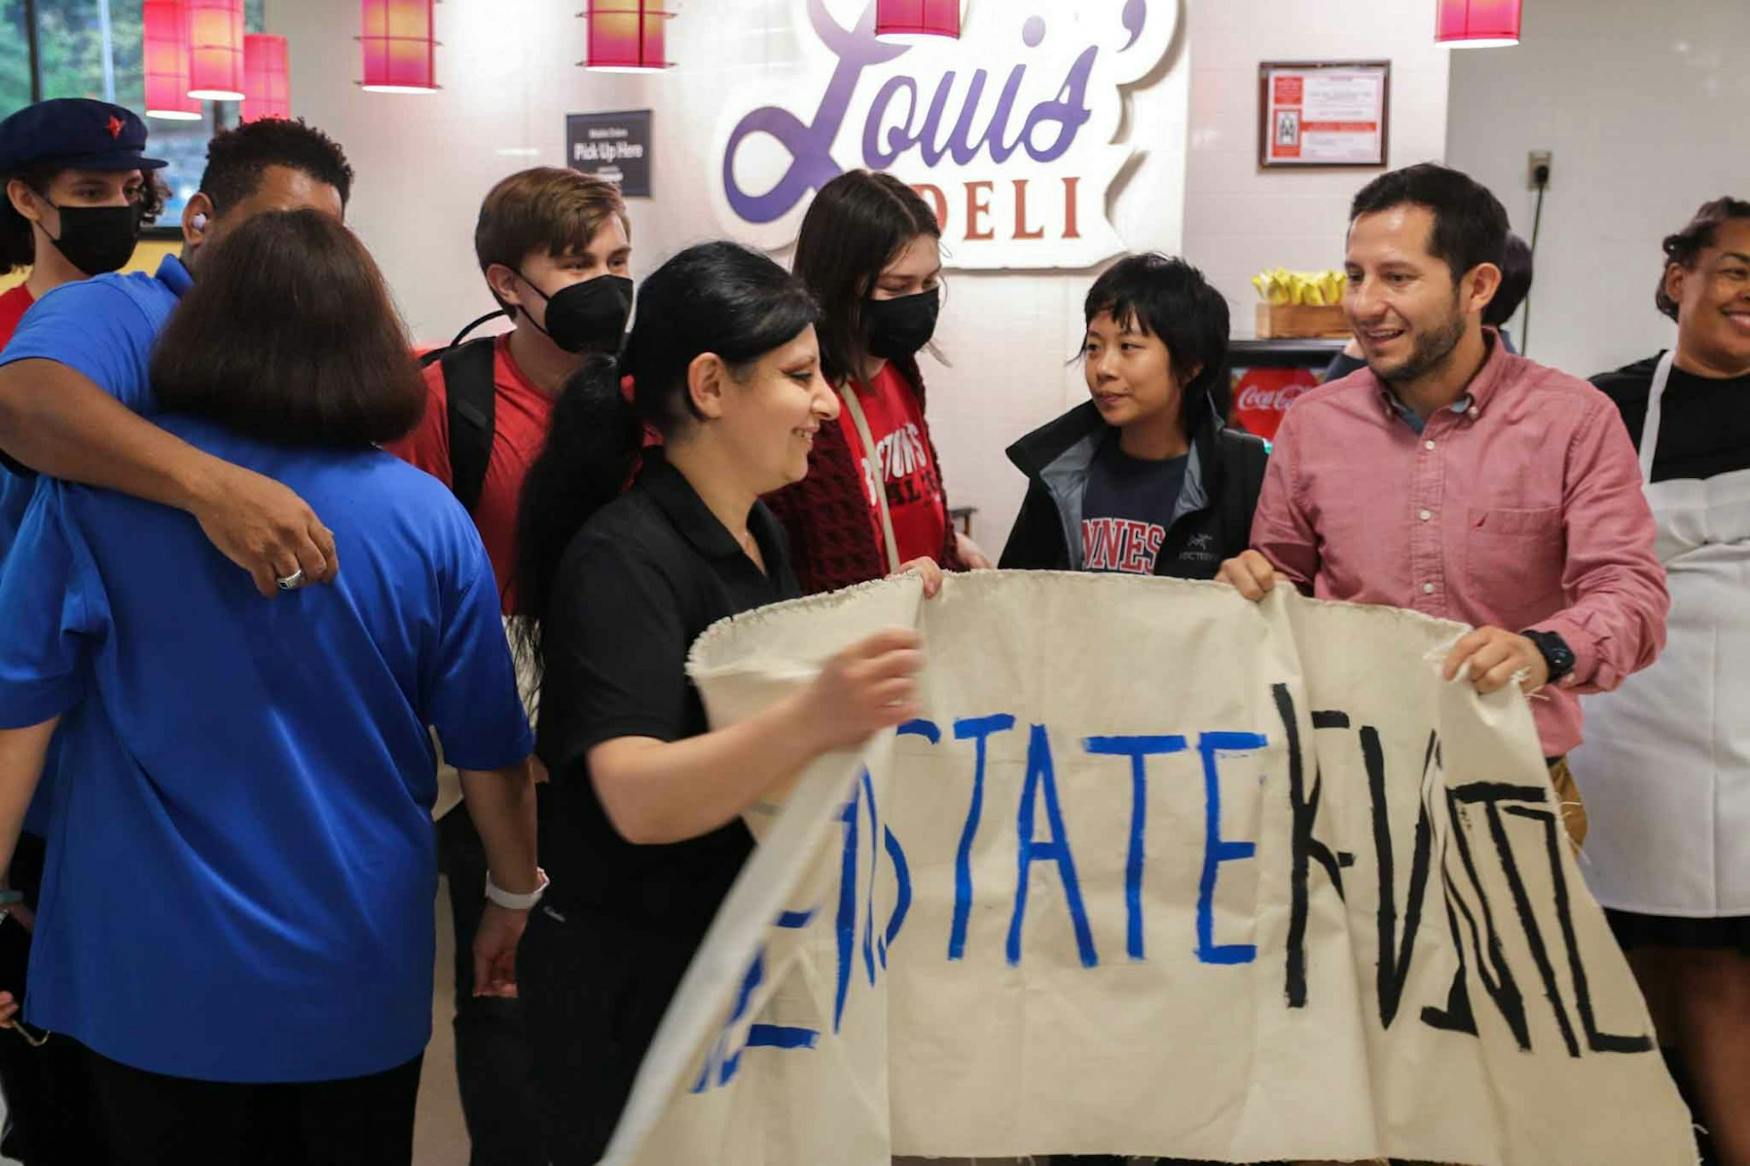 WORKER VOICES: The Brandeis Leftist Union gathered students and workers to protest for Merisier's reinstatement.